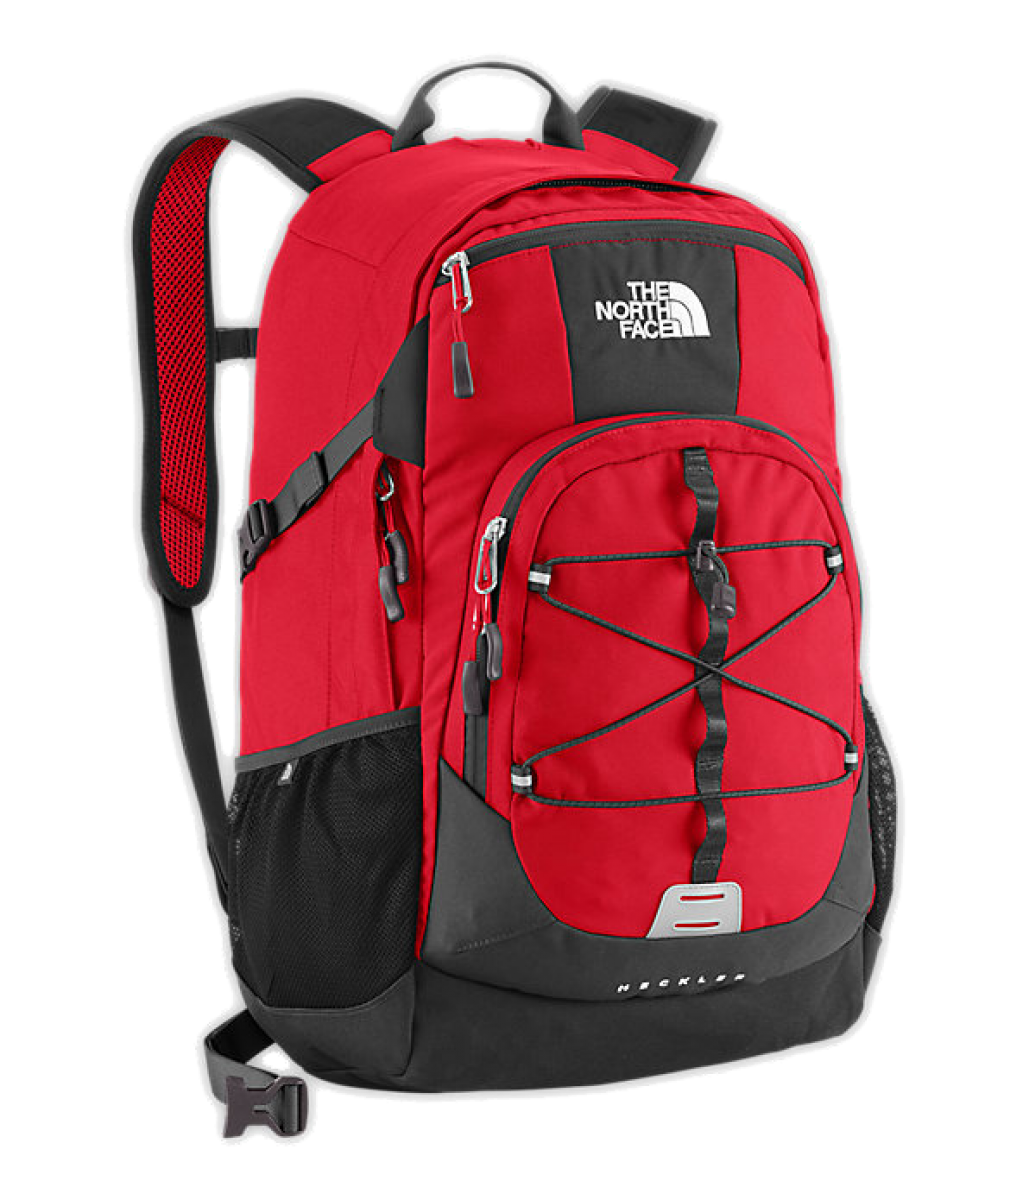 The North Face Hero Bag PNG Image for 